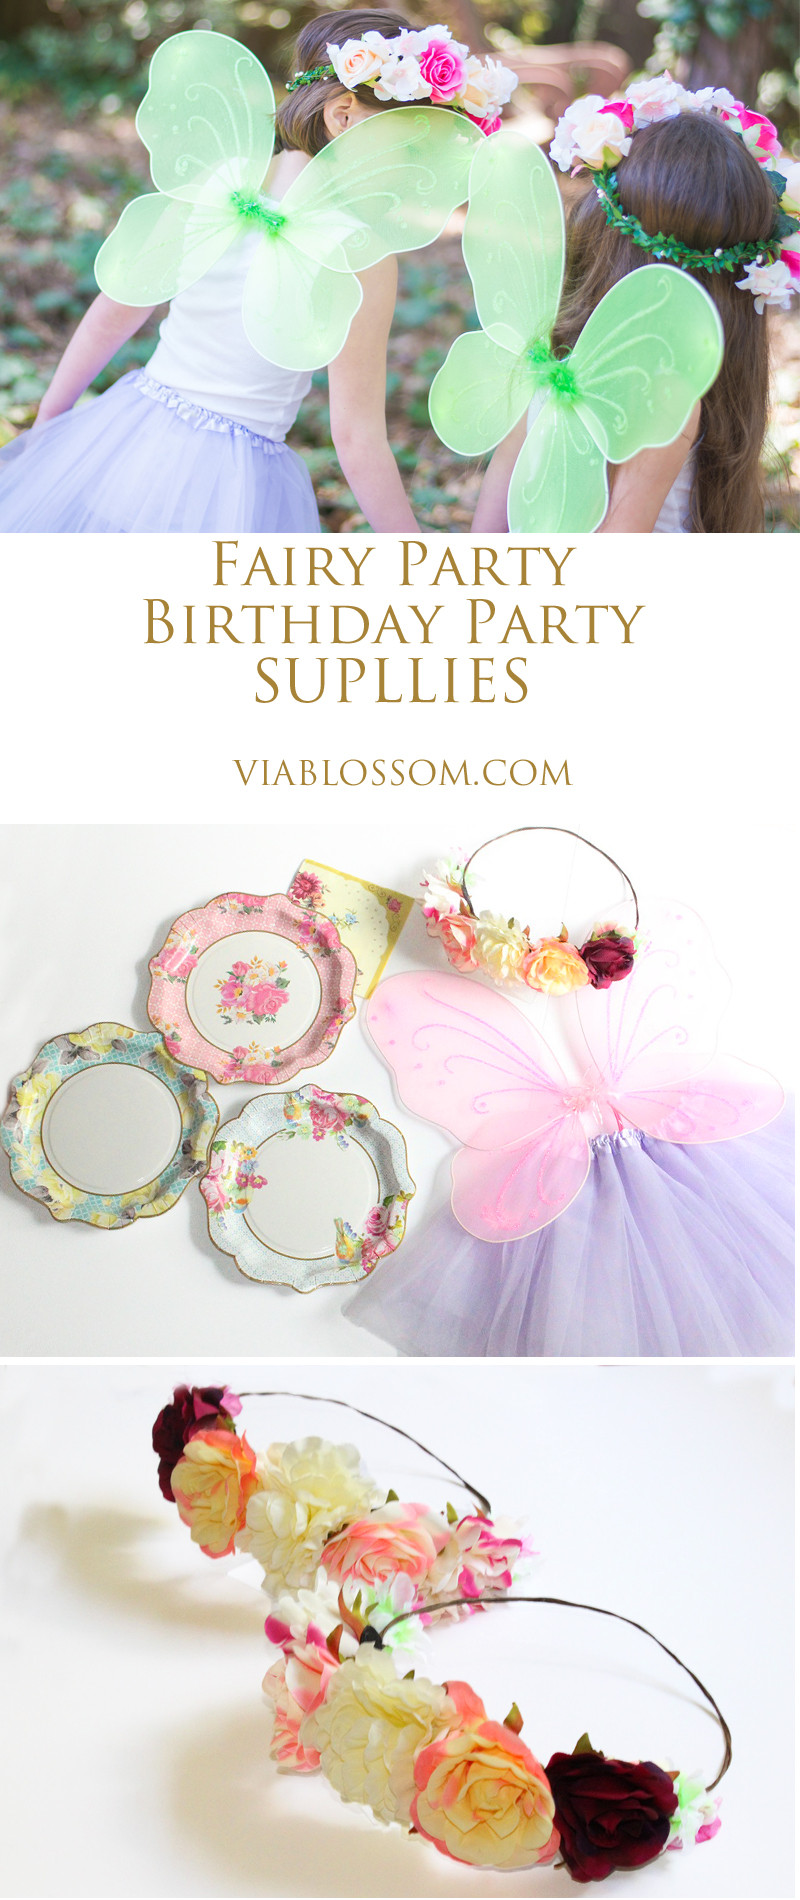 Fairy Birthday Party Supplies
 Must Have Fairy Party Supplies Via Blossom